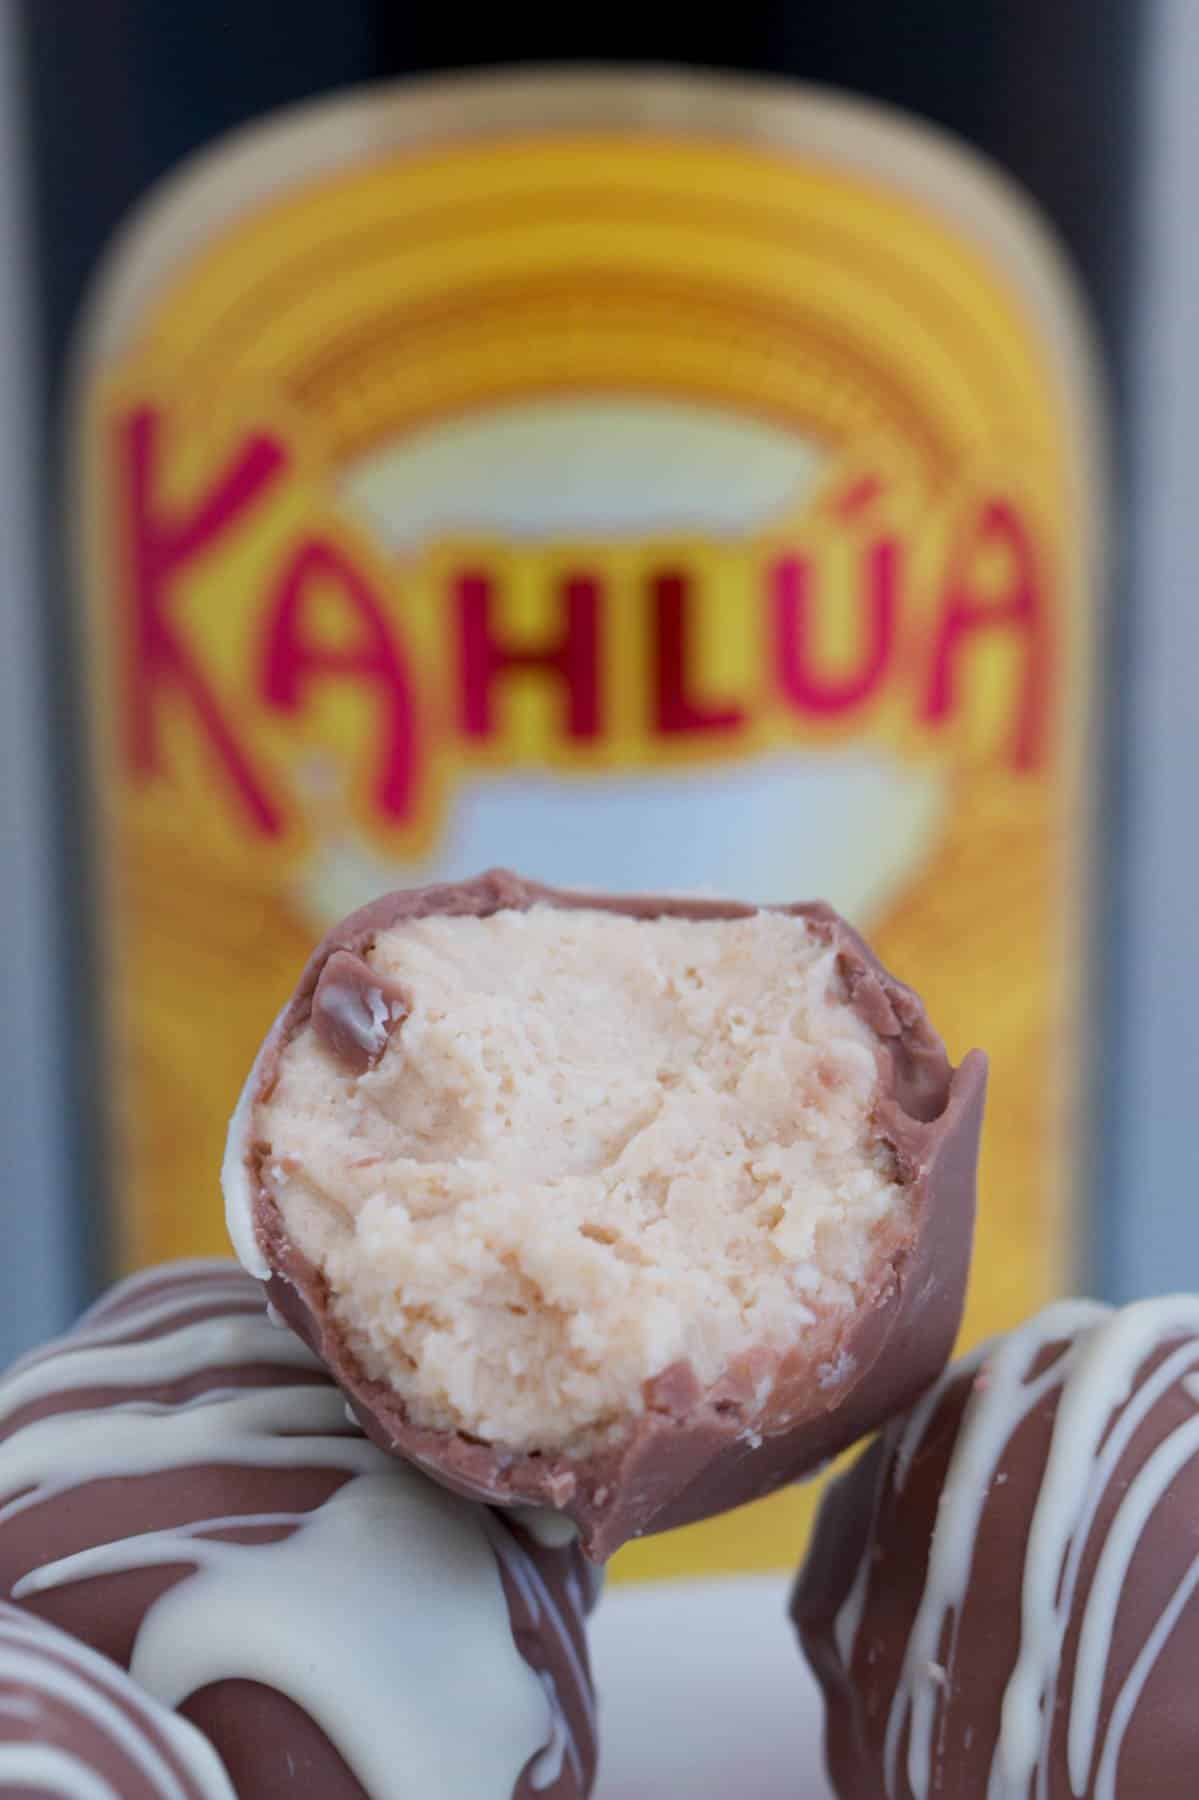 A half eaten Kahlua cheesecake ball with bottle of Kahlua in the background.